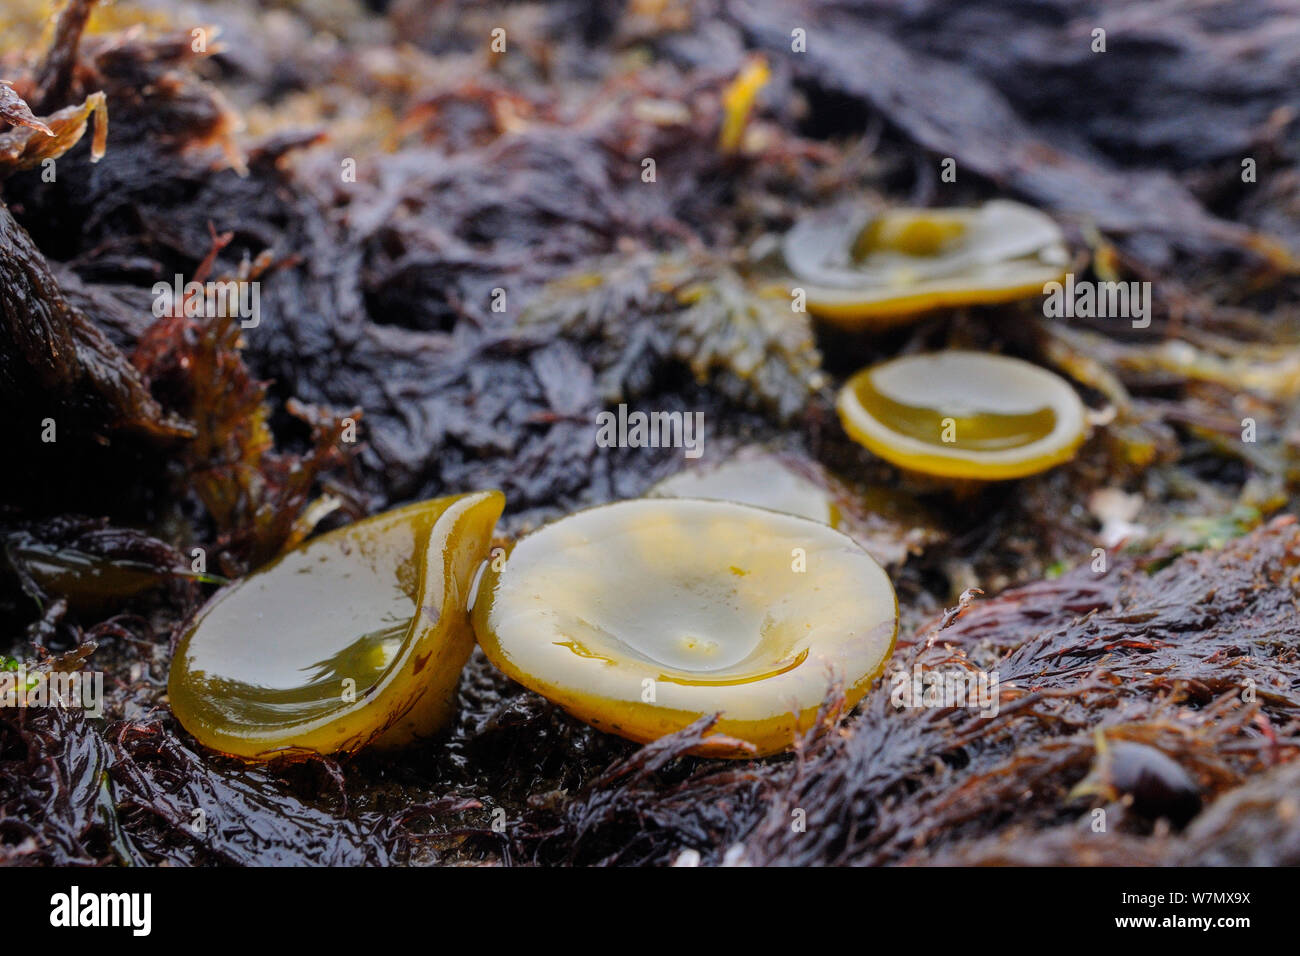 Young Sea thong (Himanthalia elongata) 'buttons' on intertidal rocks exposed at low tide, Crail, Fife, UK, July Stock Photo